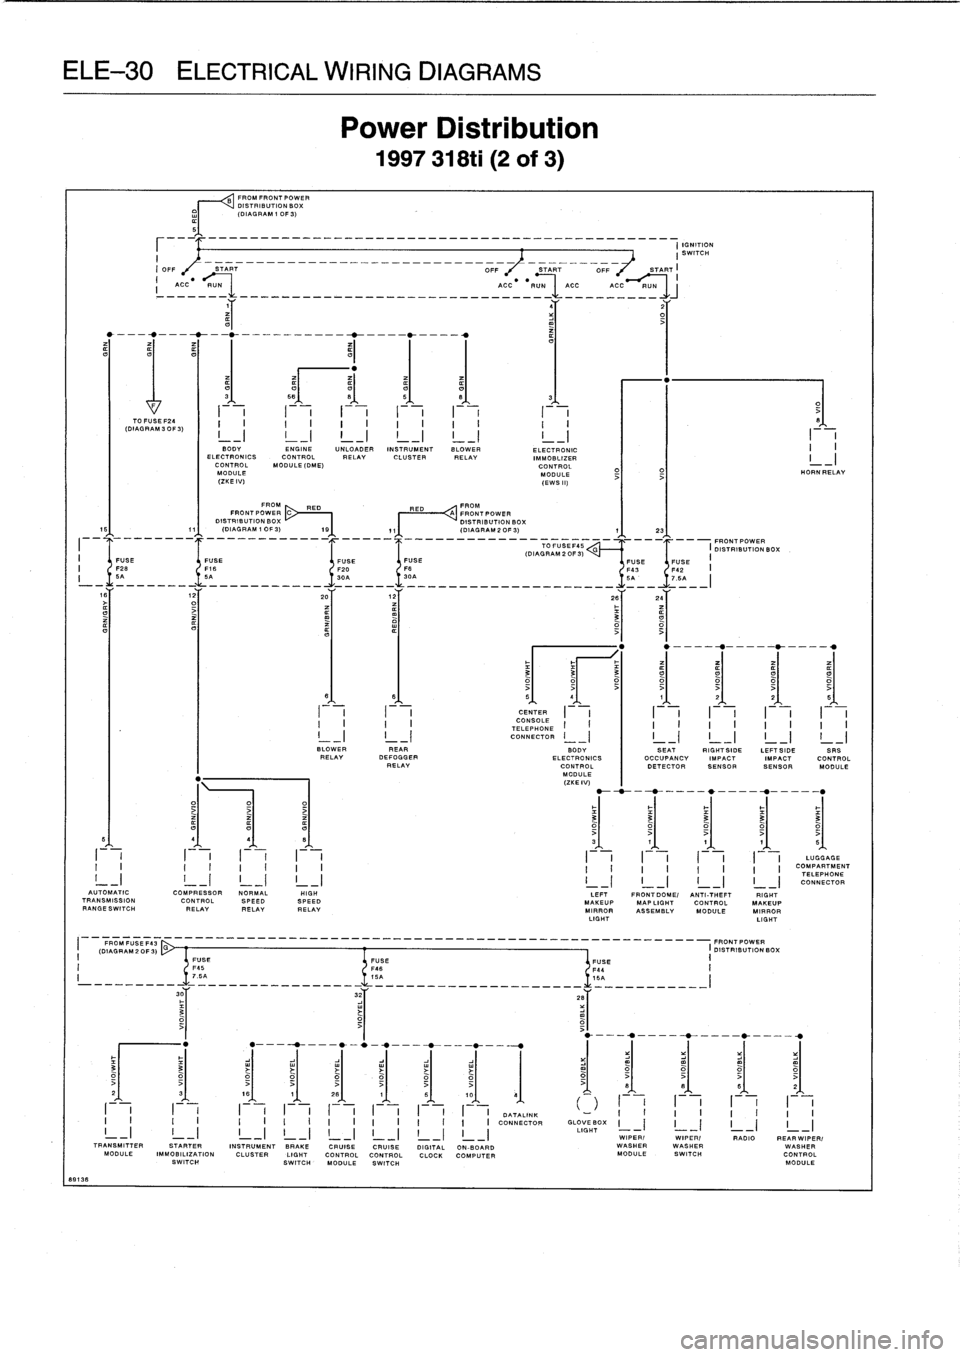 BMW M3 1993 E36 Service Manual 
ELE-30
ELECTRICAL
WIRING
DIAGRAMS

I
ACC
-R=_
____-____-______________
ACC
-
RUN

	

ACC
-_-C~

4Y

	

2Y

I

	

I

TO
FUSE
F24
(DIAGRAM
30F
3)

FROM
FRONT
POWER
DISTRIBUTION
BOX
(DIAGRAM
1
0F3)
IGNI